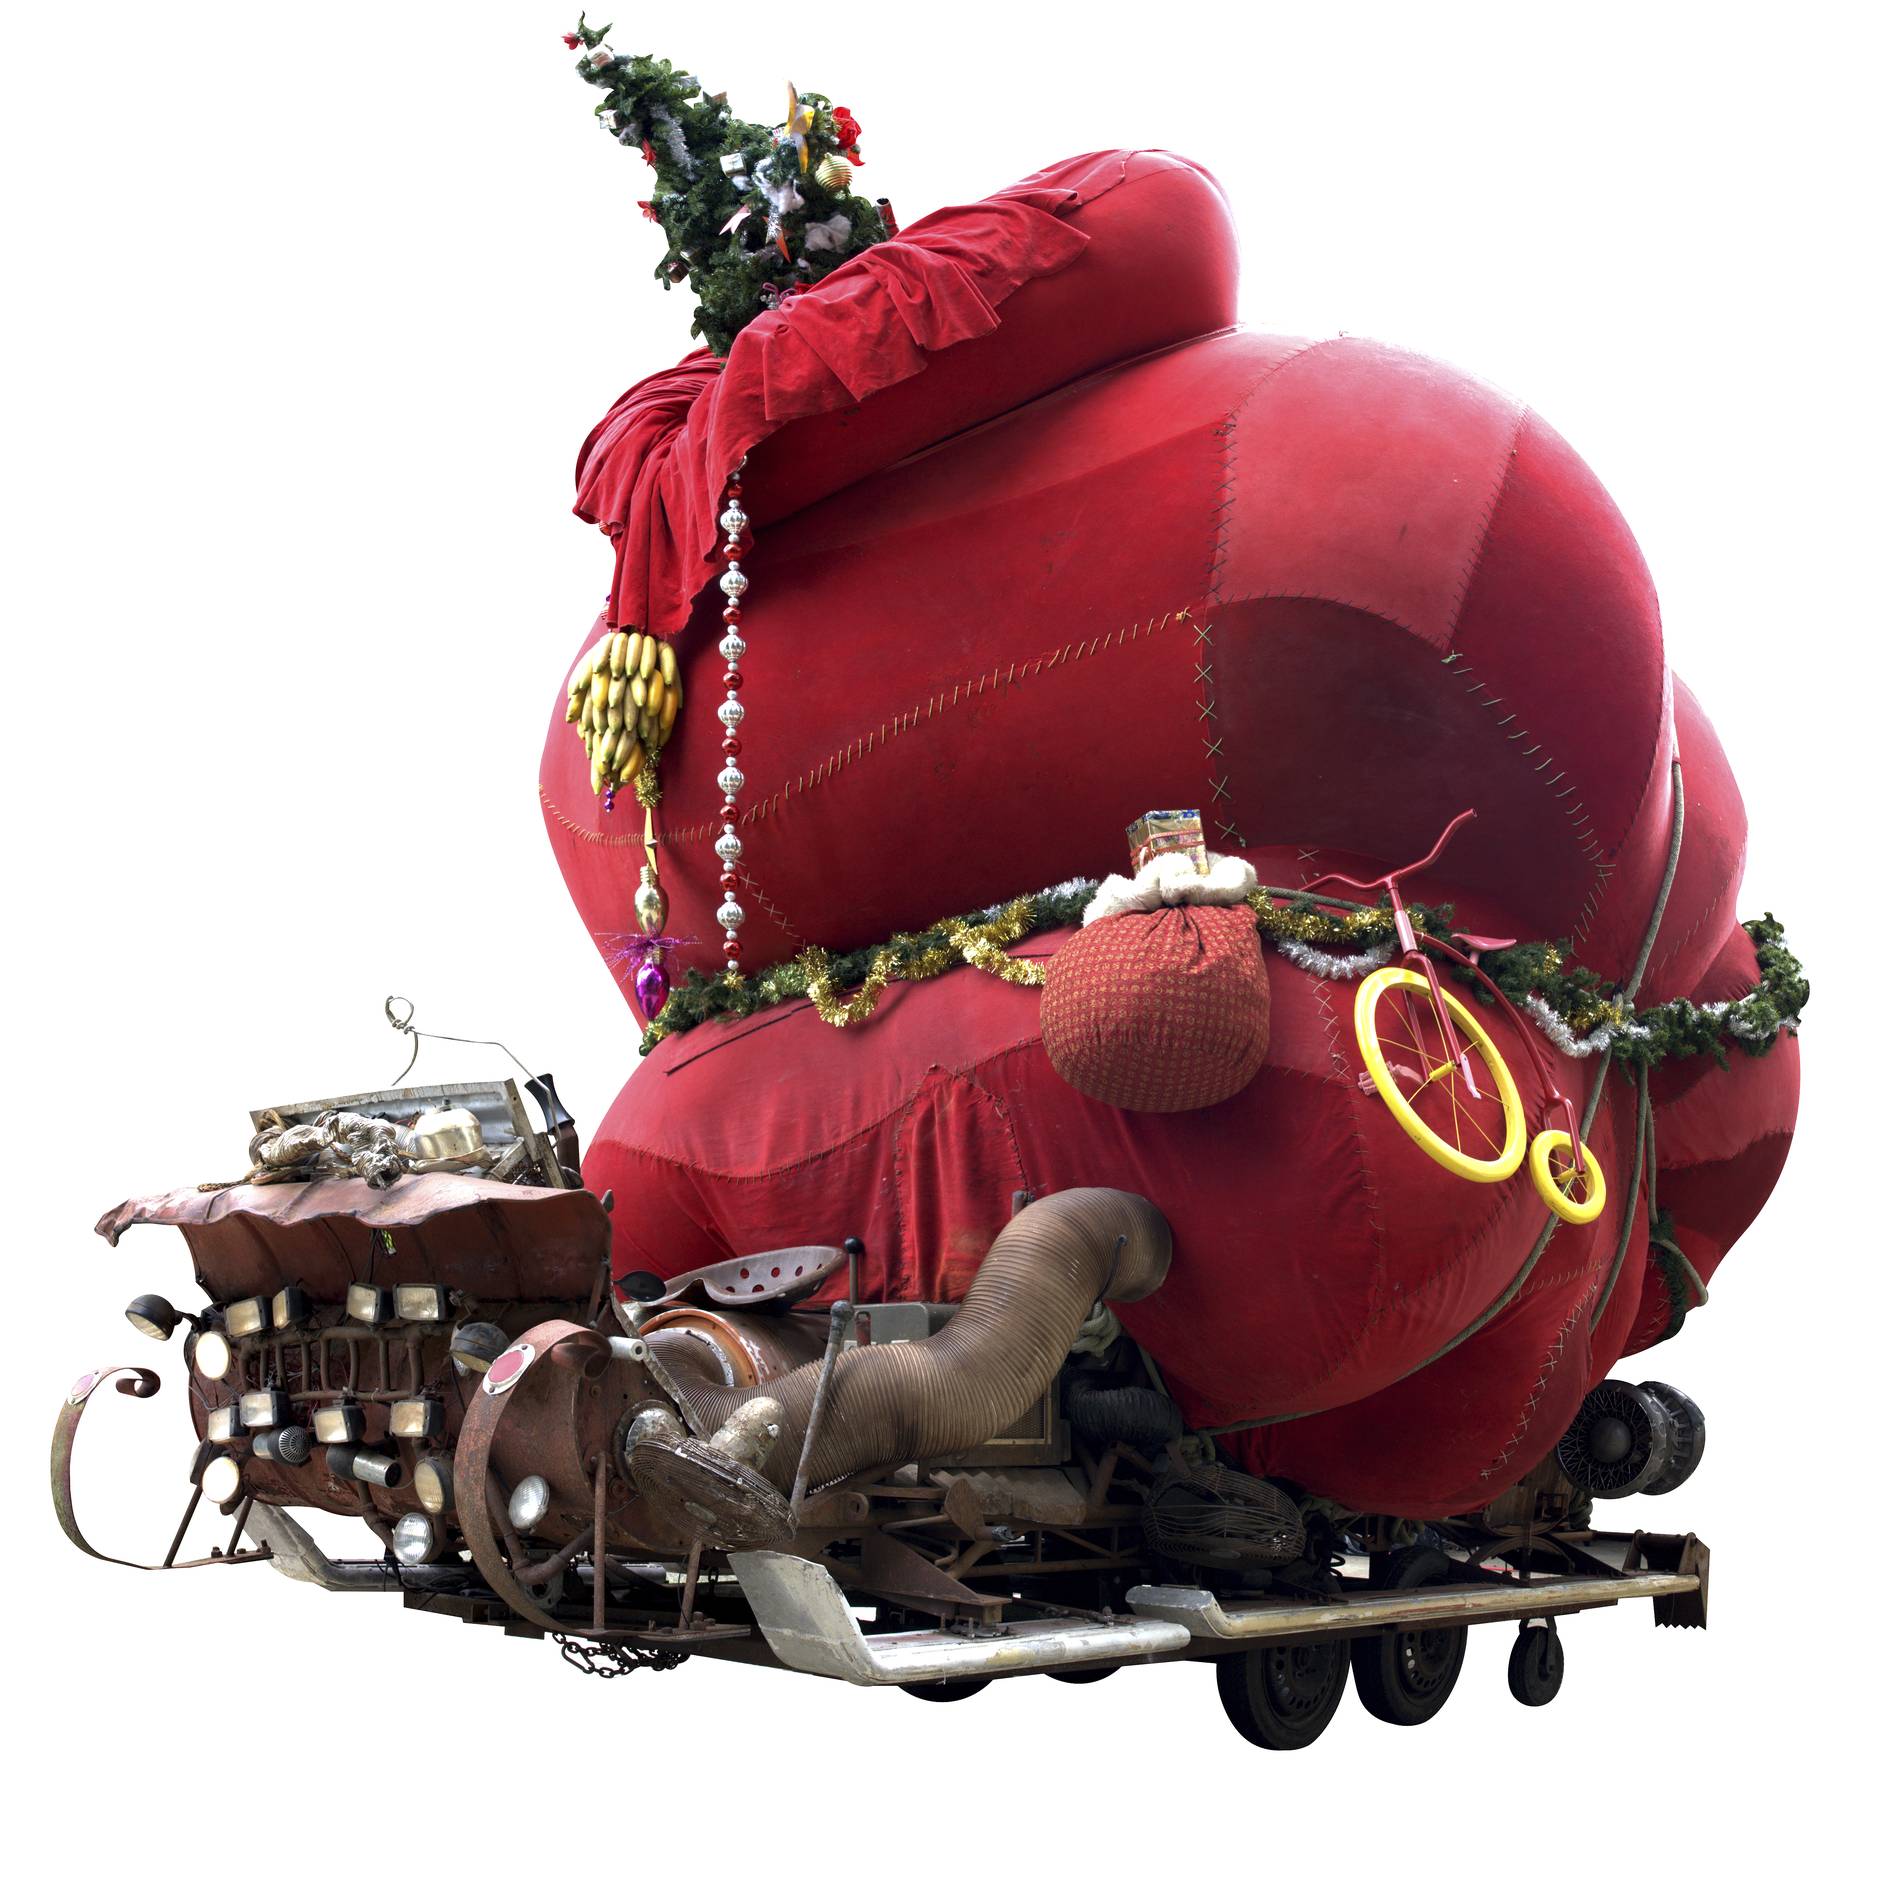 Full-size elf sleigh from The Grinch